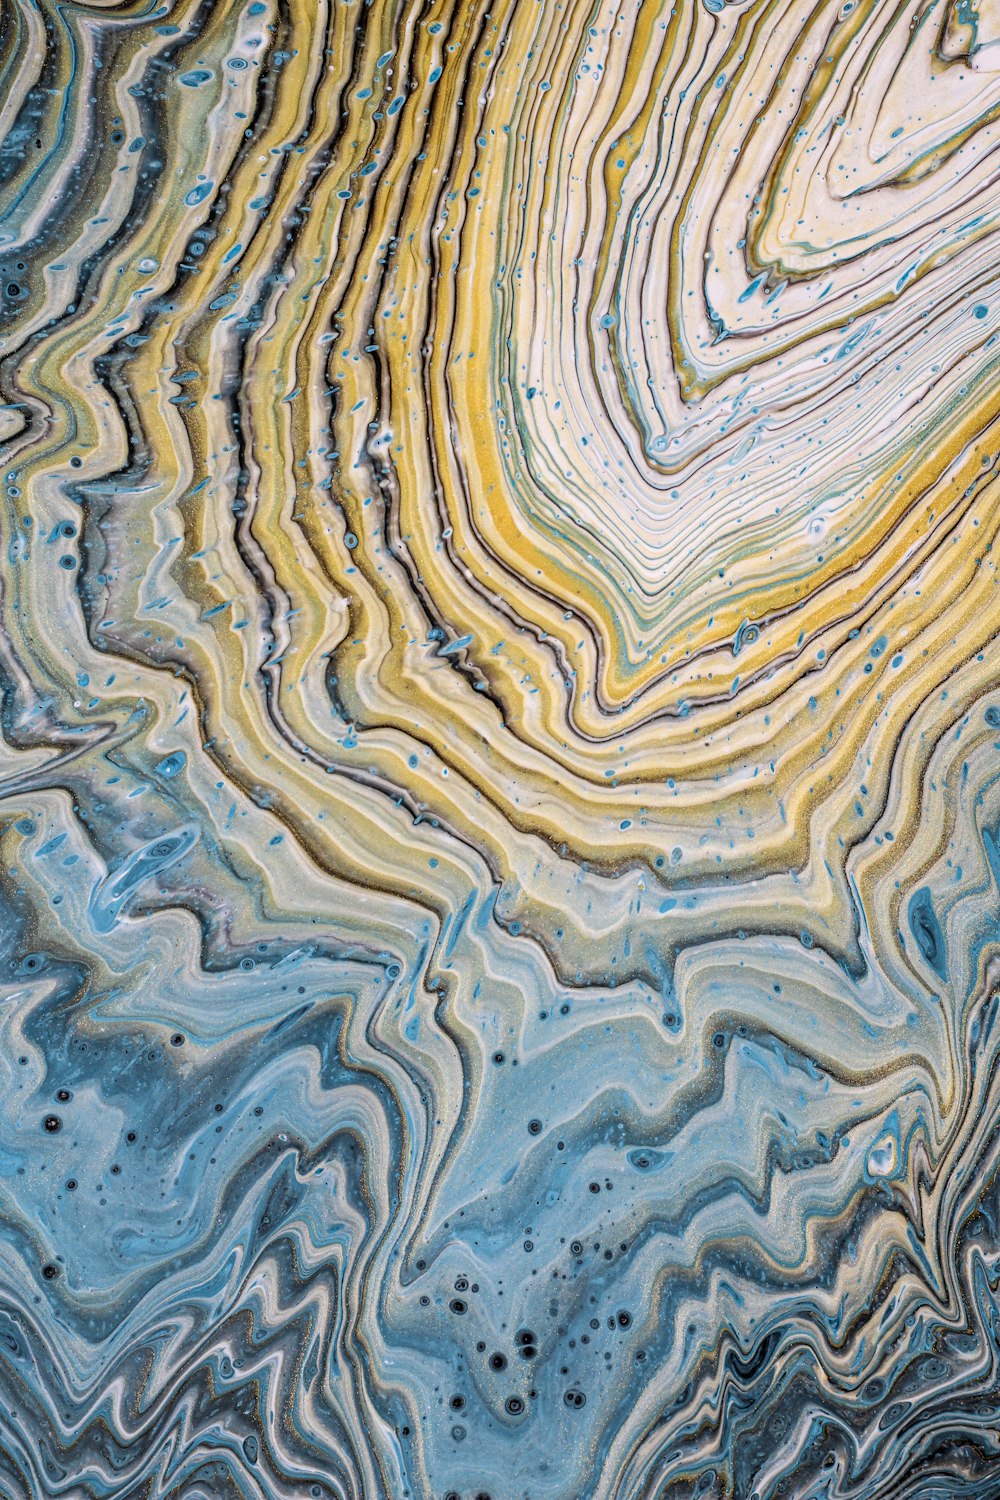 a close up view of a blue, yellow, and white marble